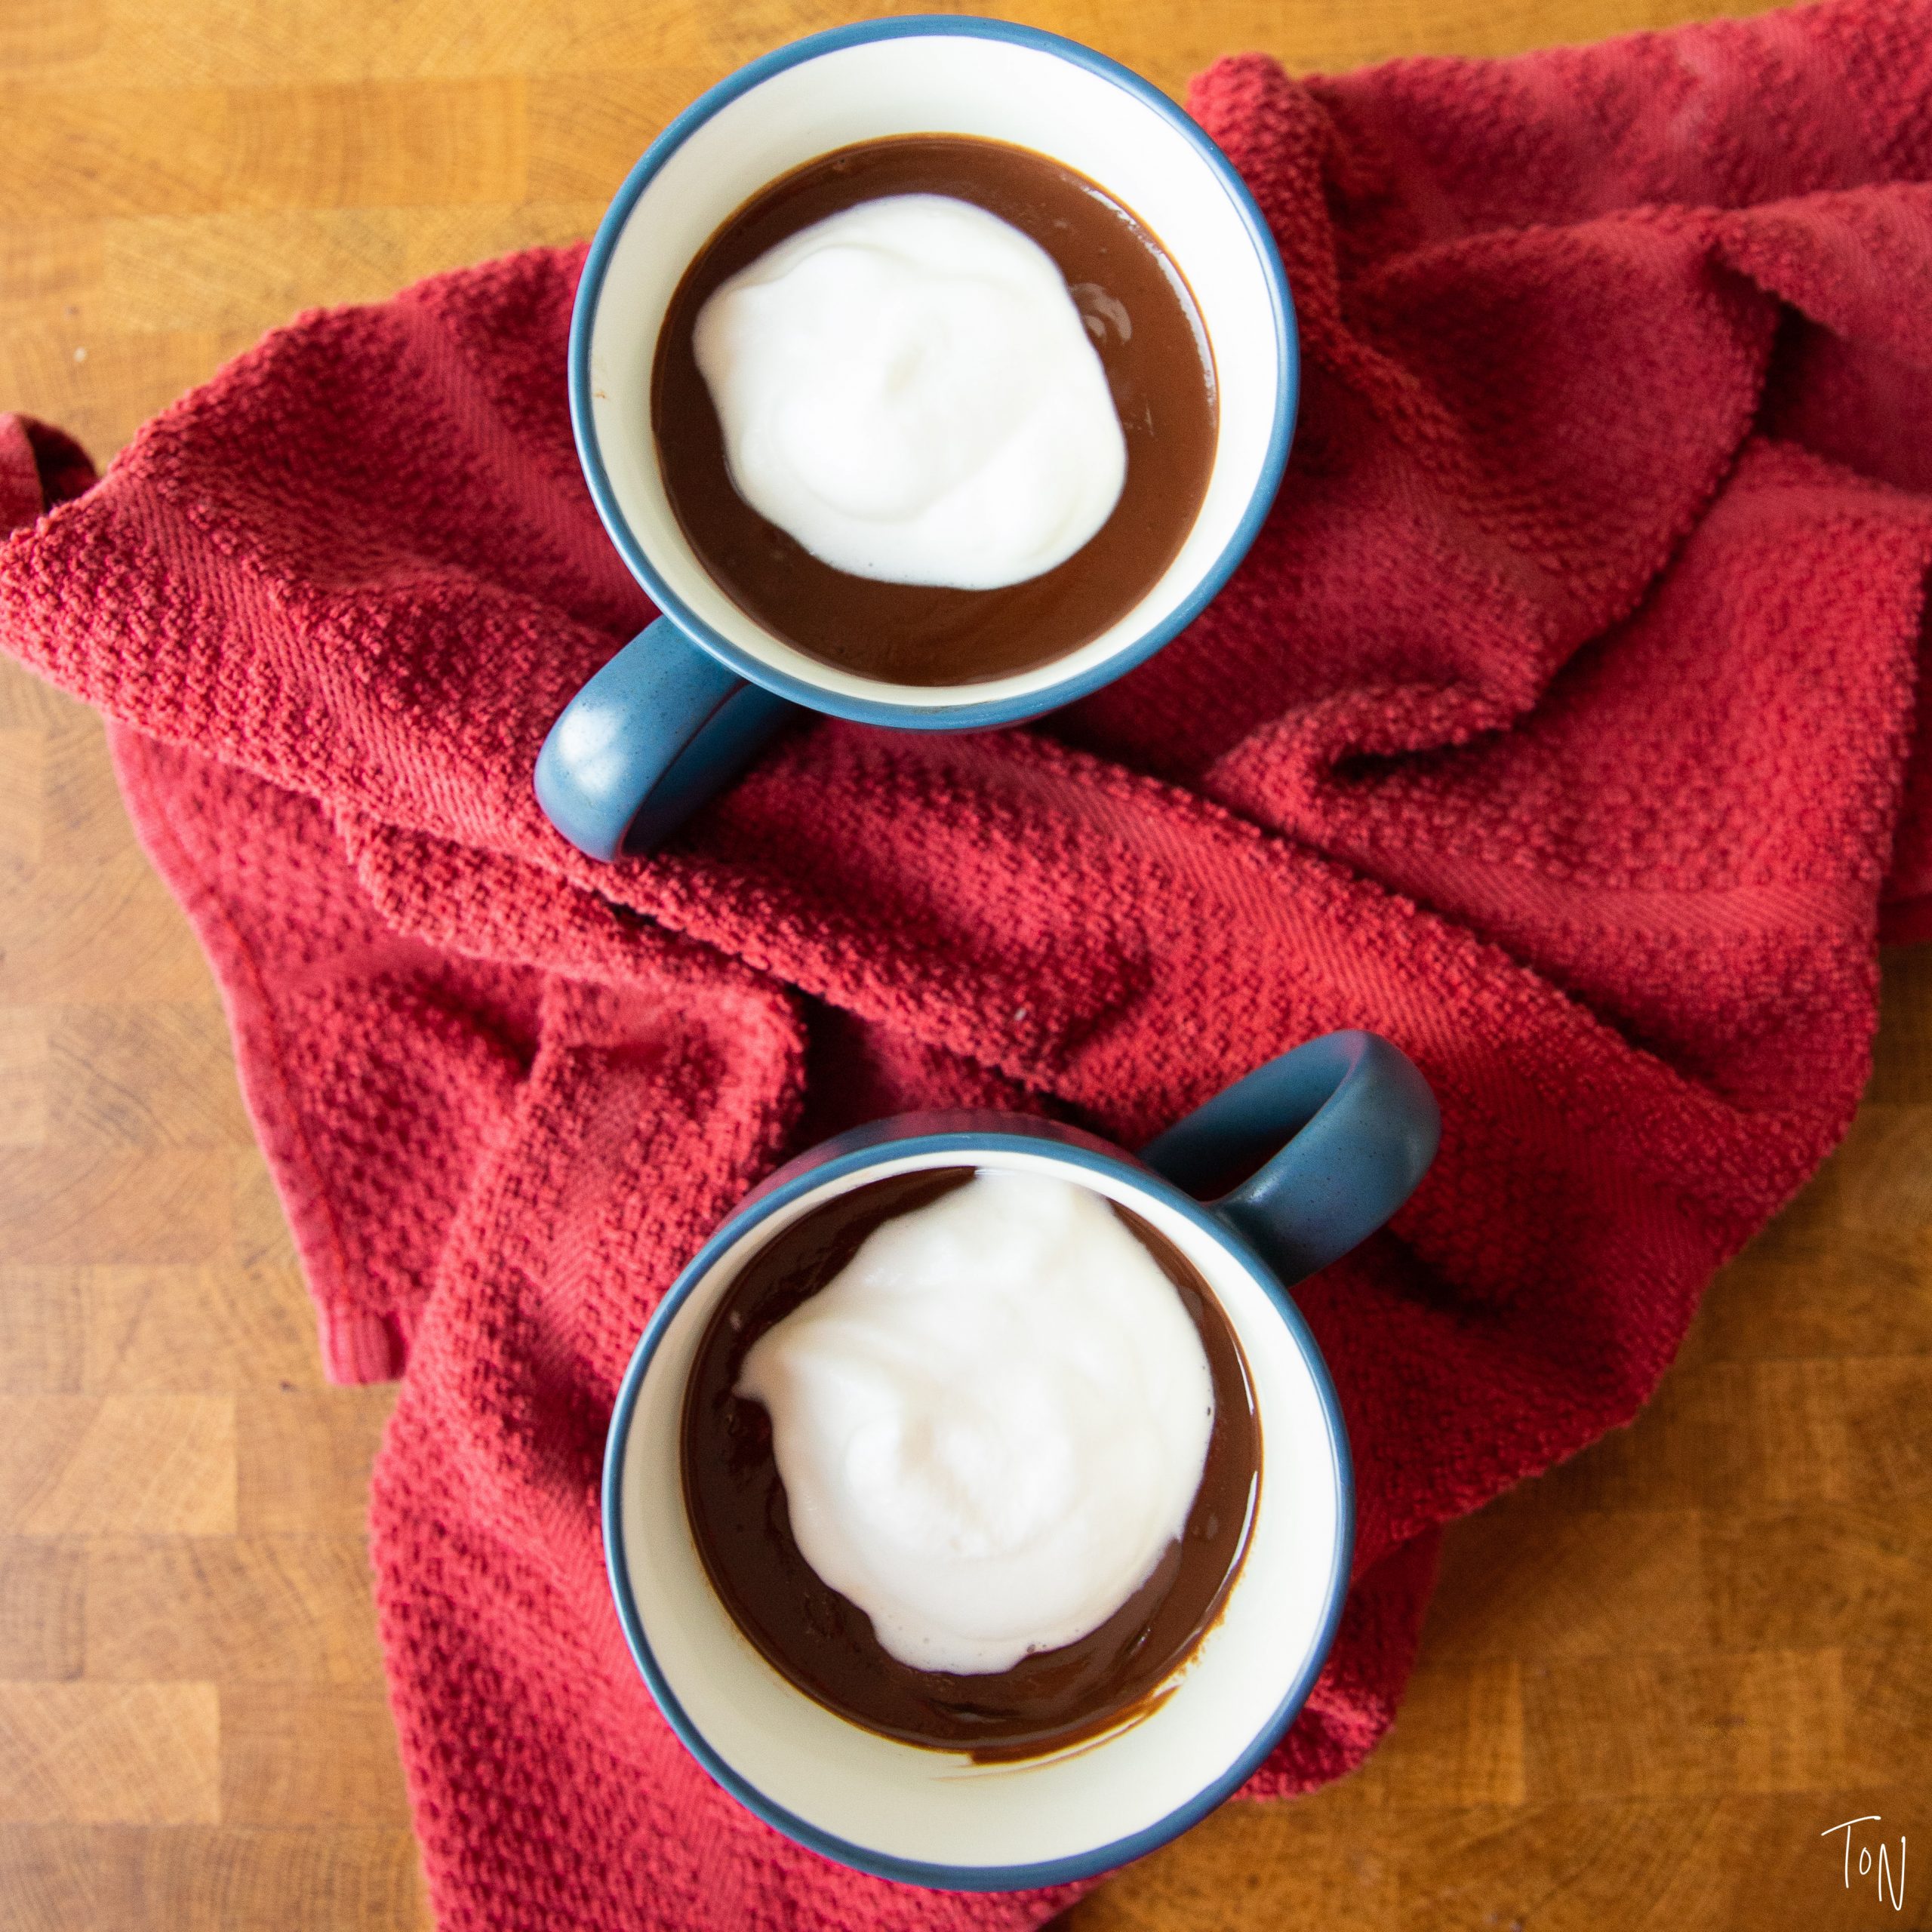 European hot chocolate is next level as the perfect winter warm up drink!